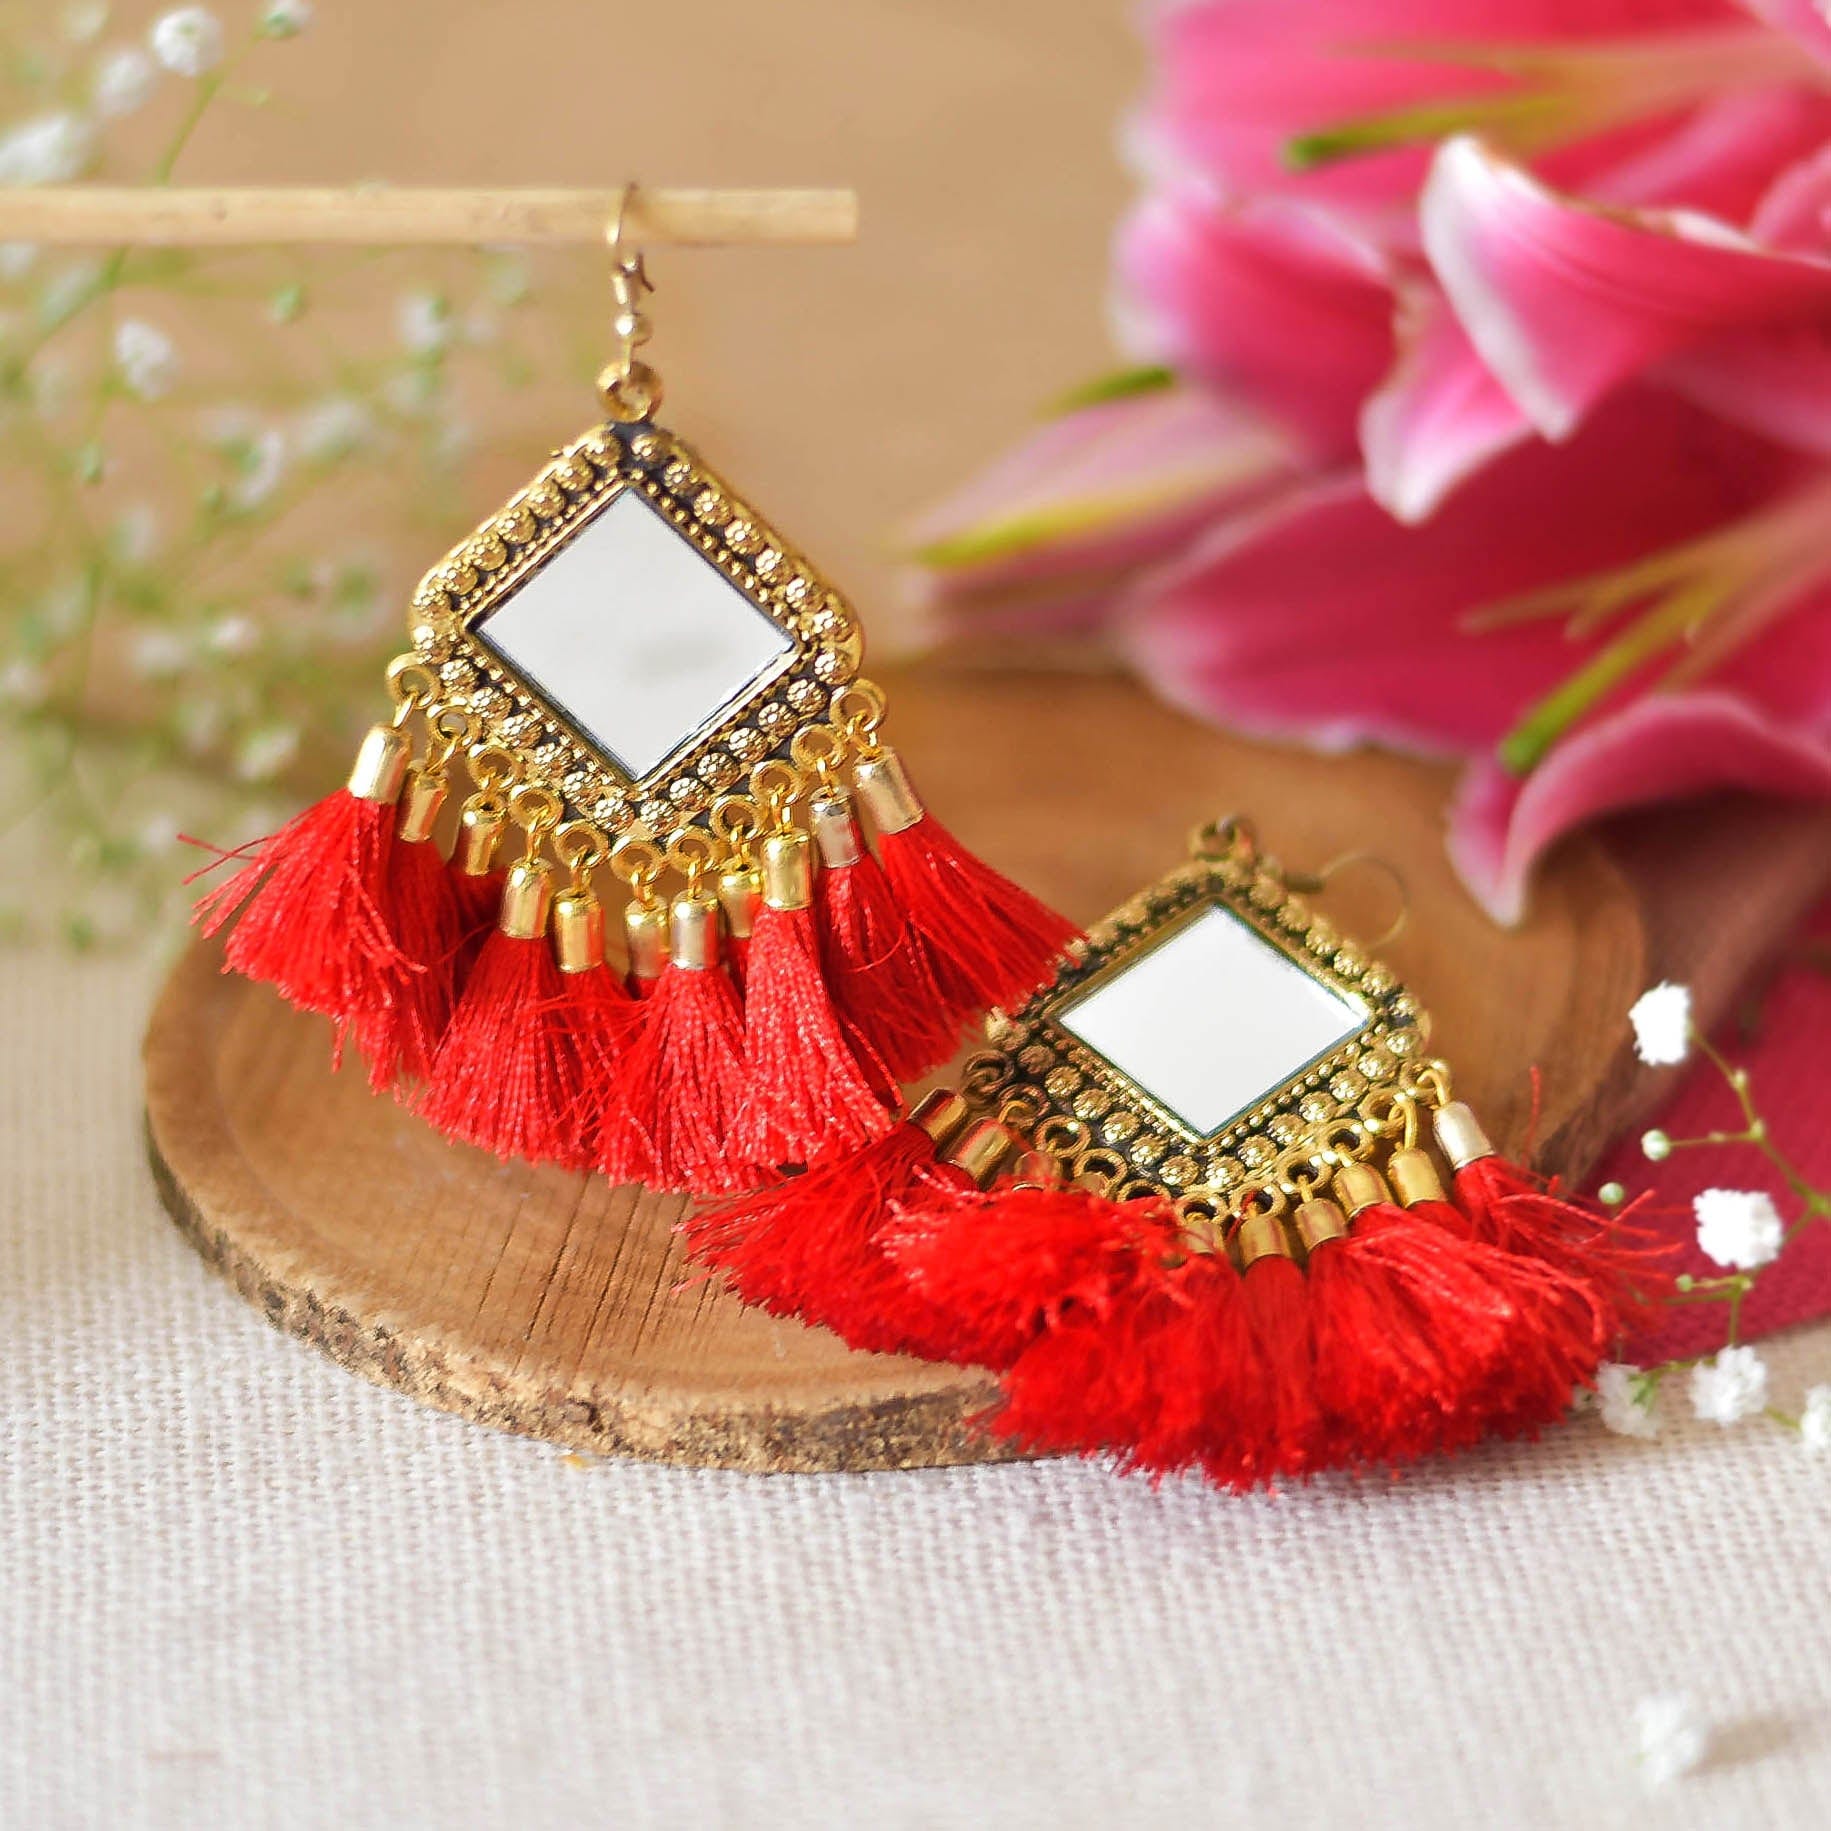 Indigo Tassel Earrings – Krafted with Happiness